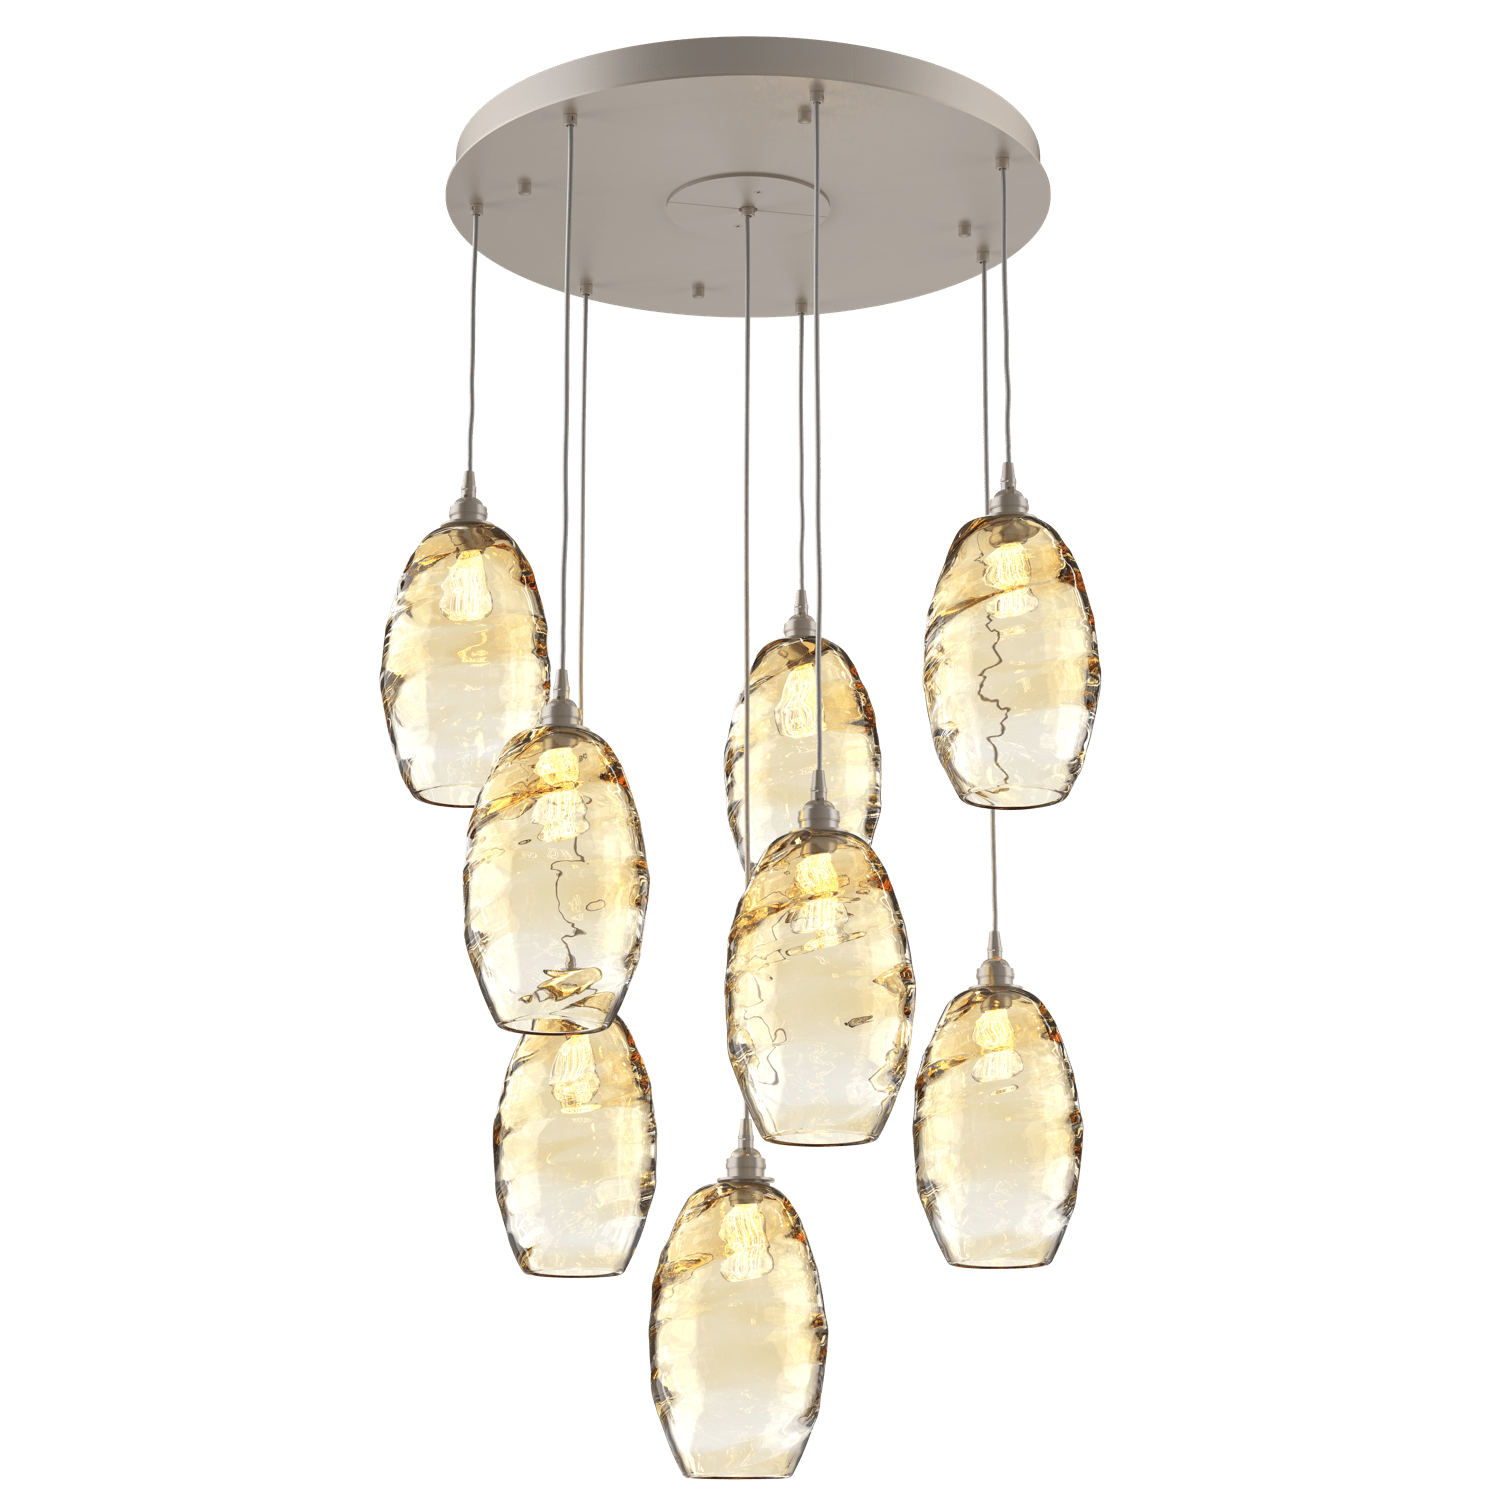 CHB0035-08-BS-OA-Hammerton-Studio-Optic-Blown-Glass-Elisse-8-light-round-pendant-chandelier-with-metallic-beige-silver-finish-and-optic-amber-blown-glass-shades-and-incandescent-lamping